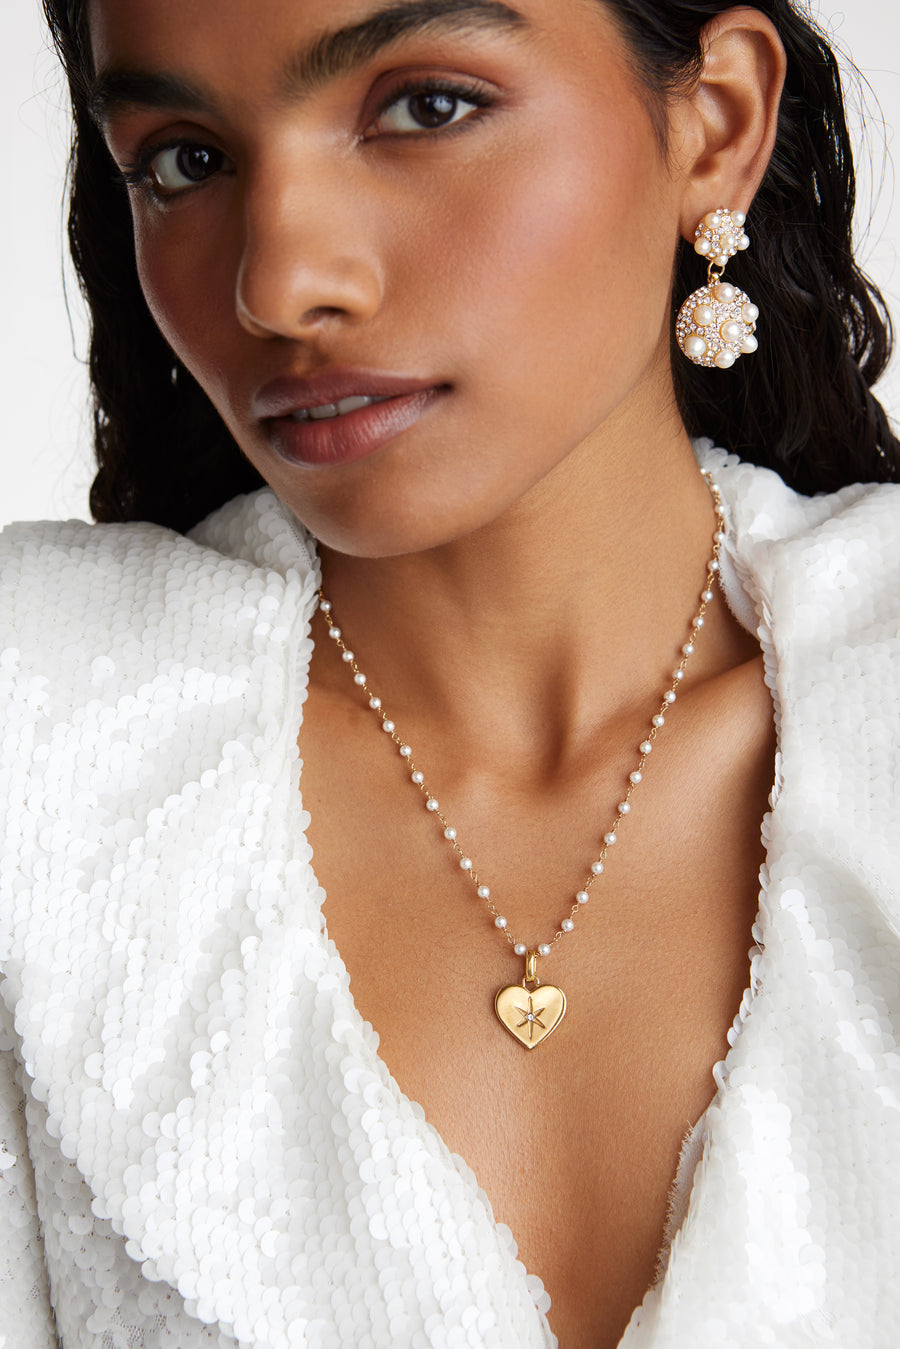 model shot wearing heart charm on a pearl beaded chain with pearl and crystal earrings